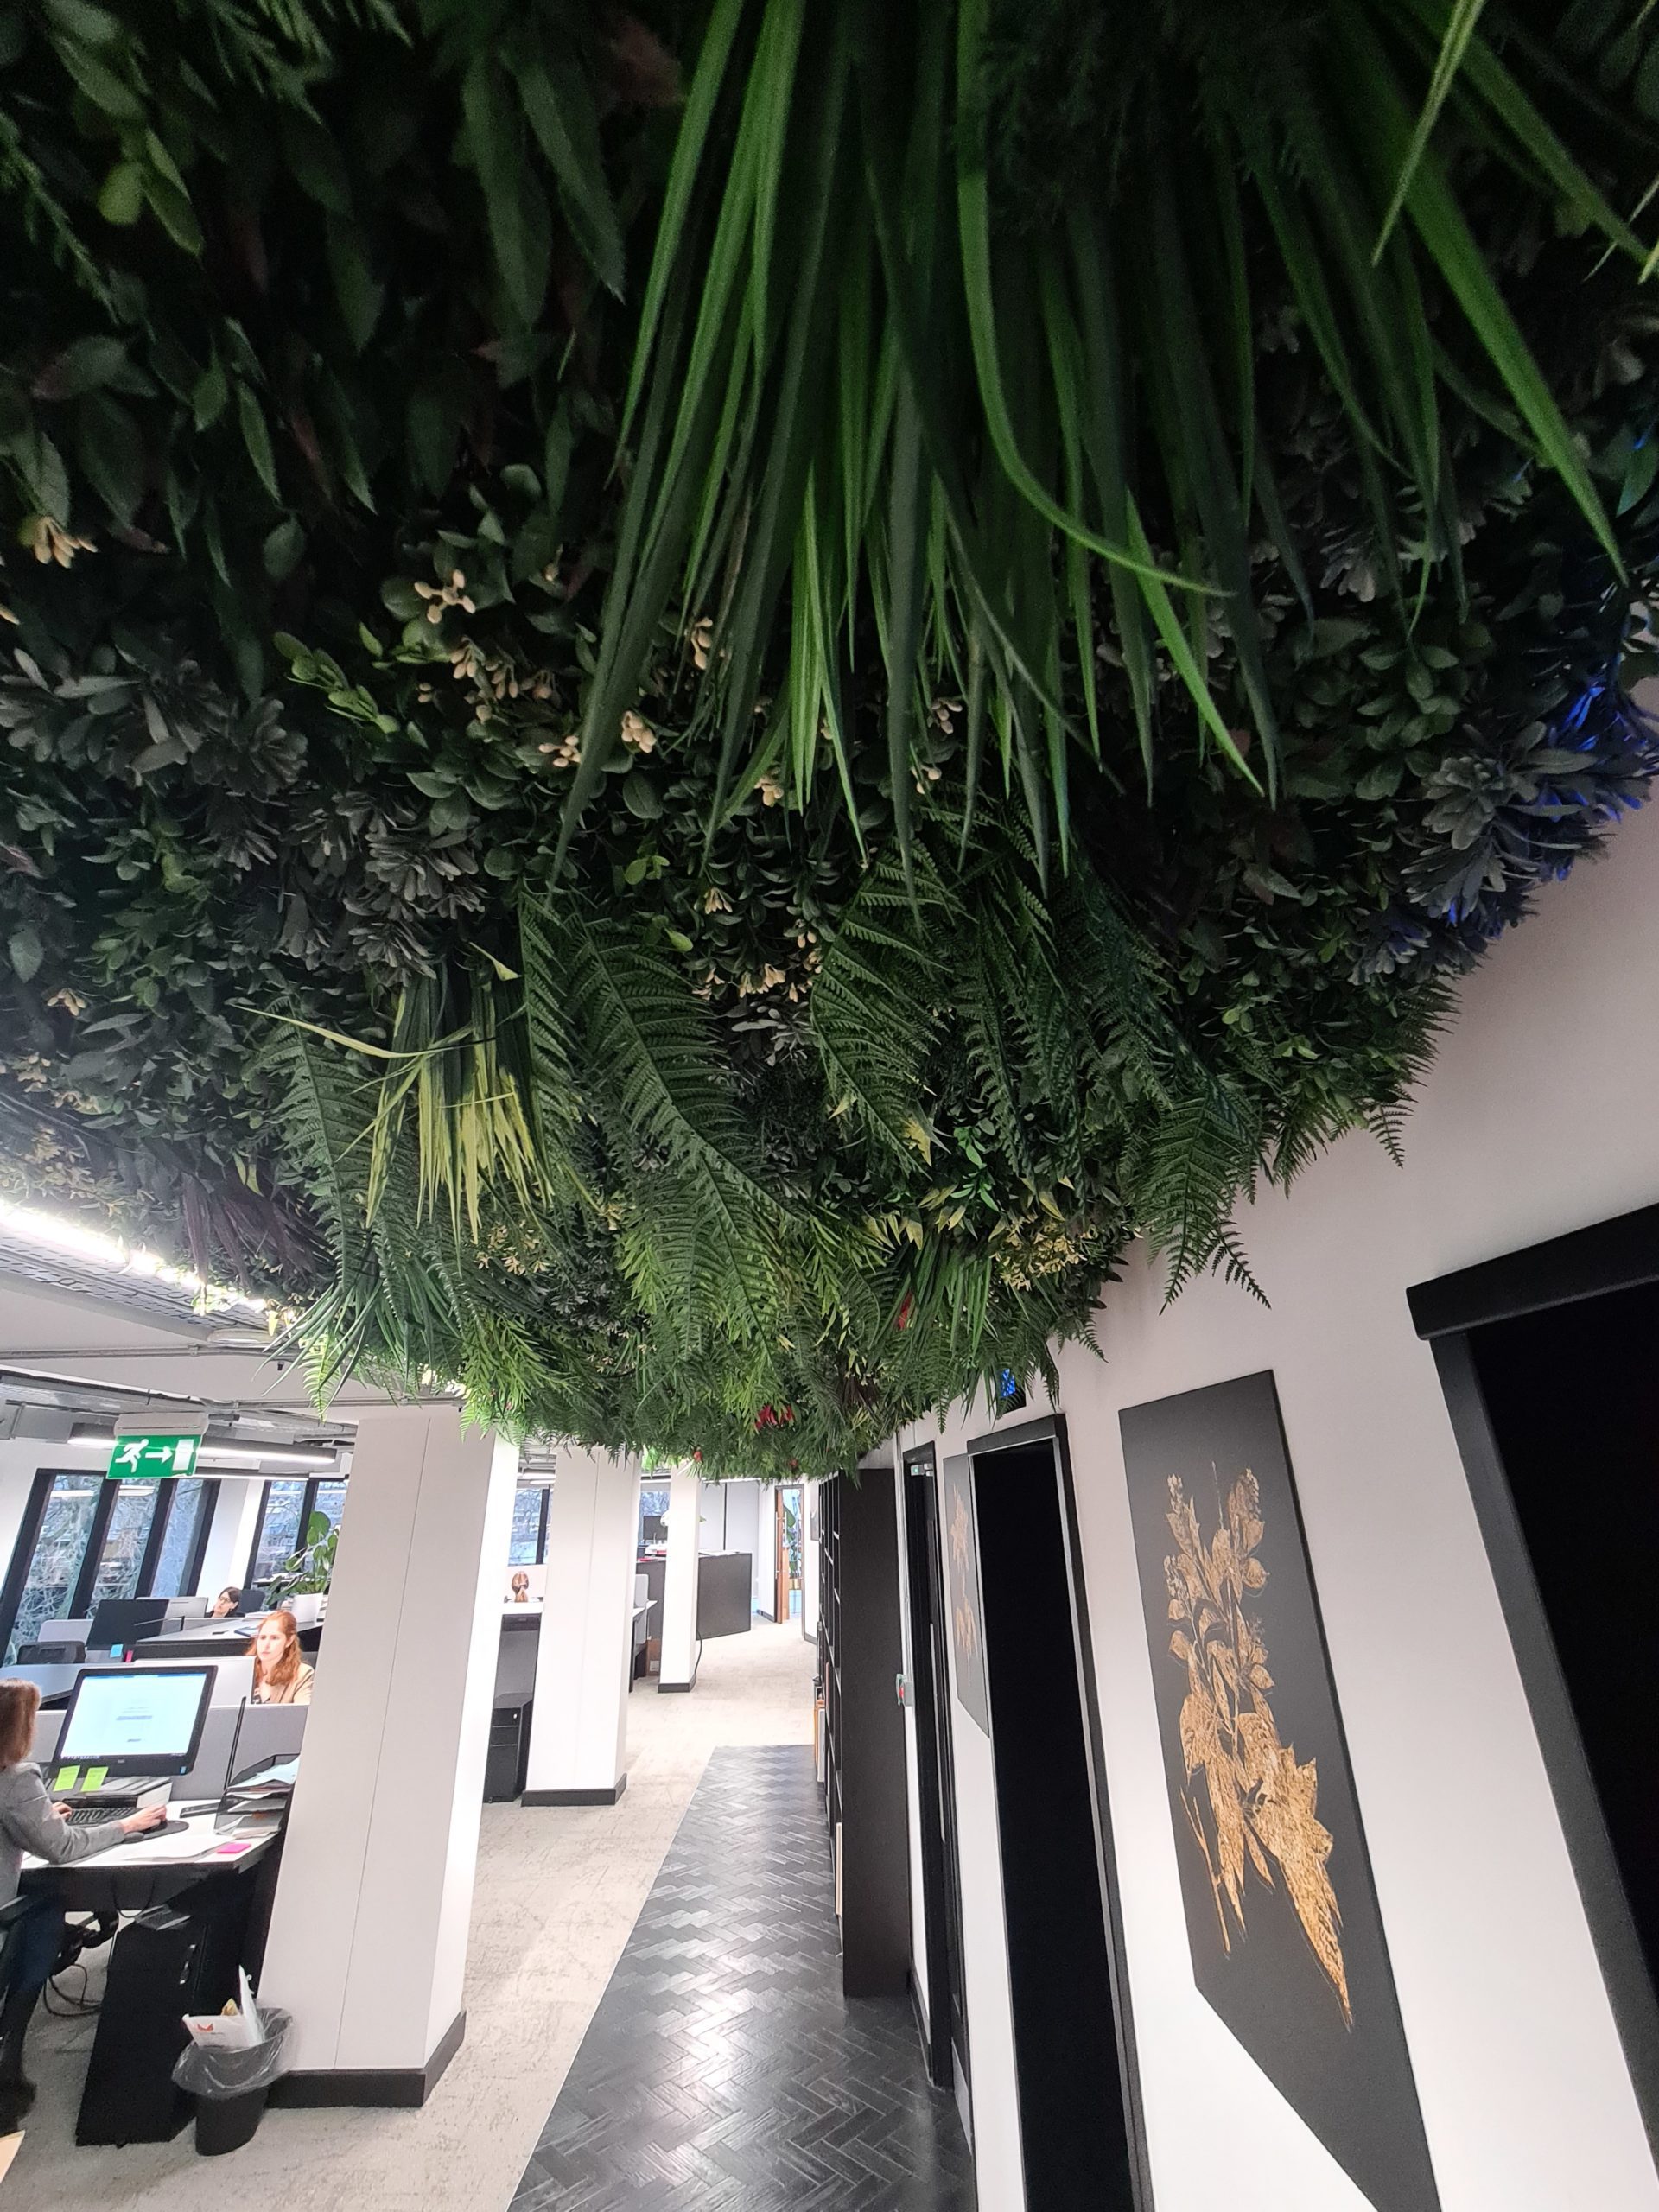 Artificial Planted Green Plant Install in London Retailer